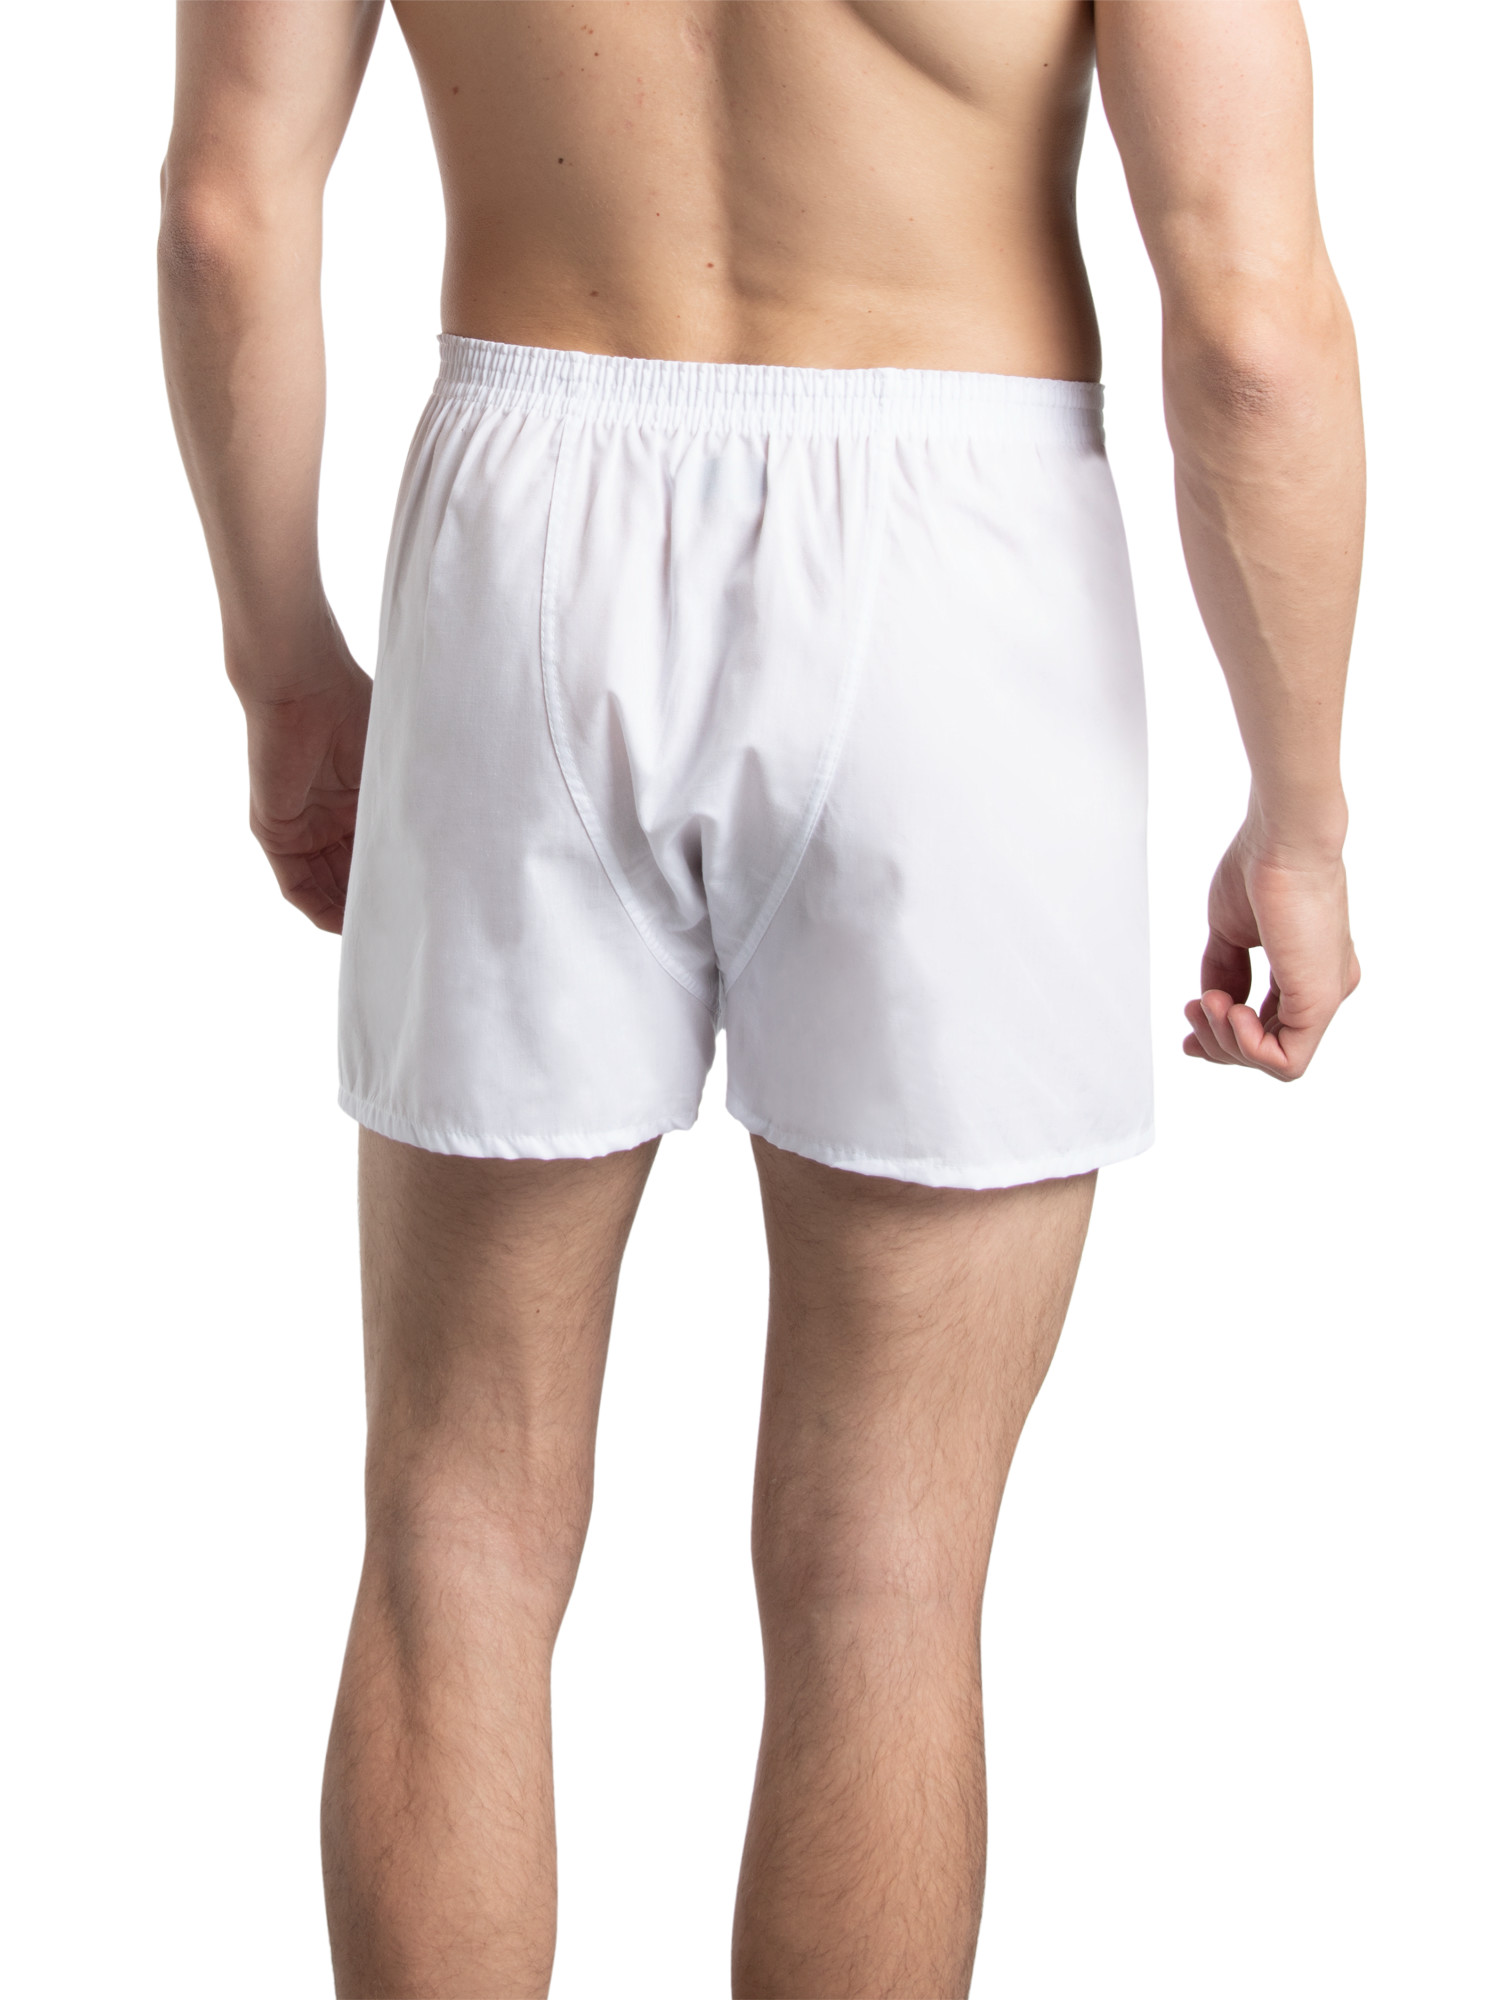 Fruit of the Loom Men's Woven Boxers, 5 Pack - image 5 of 10